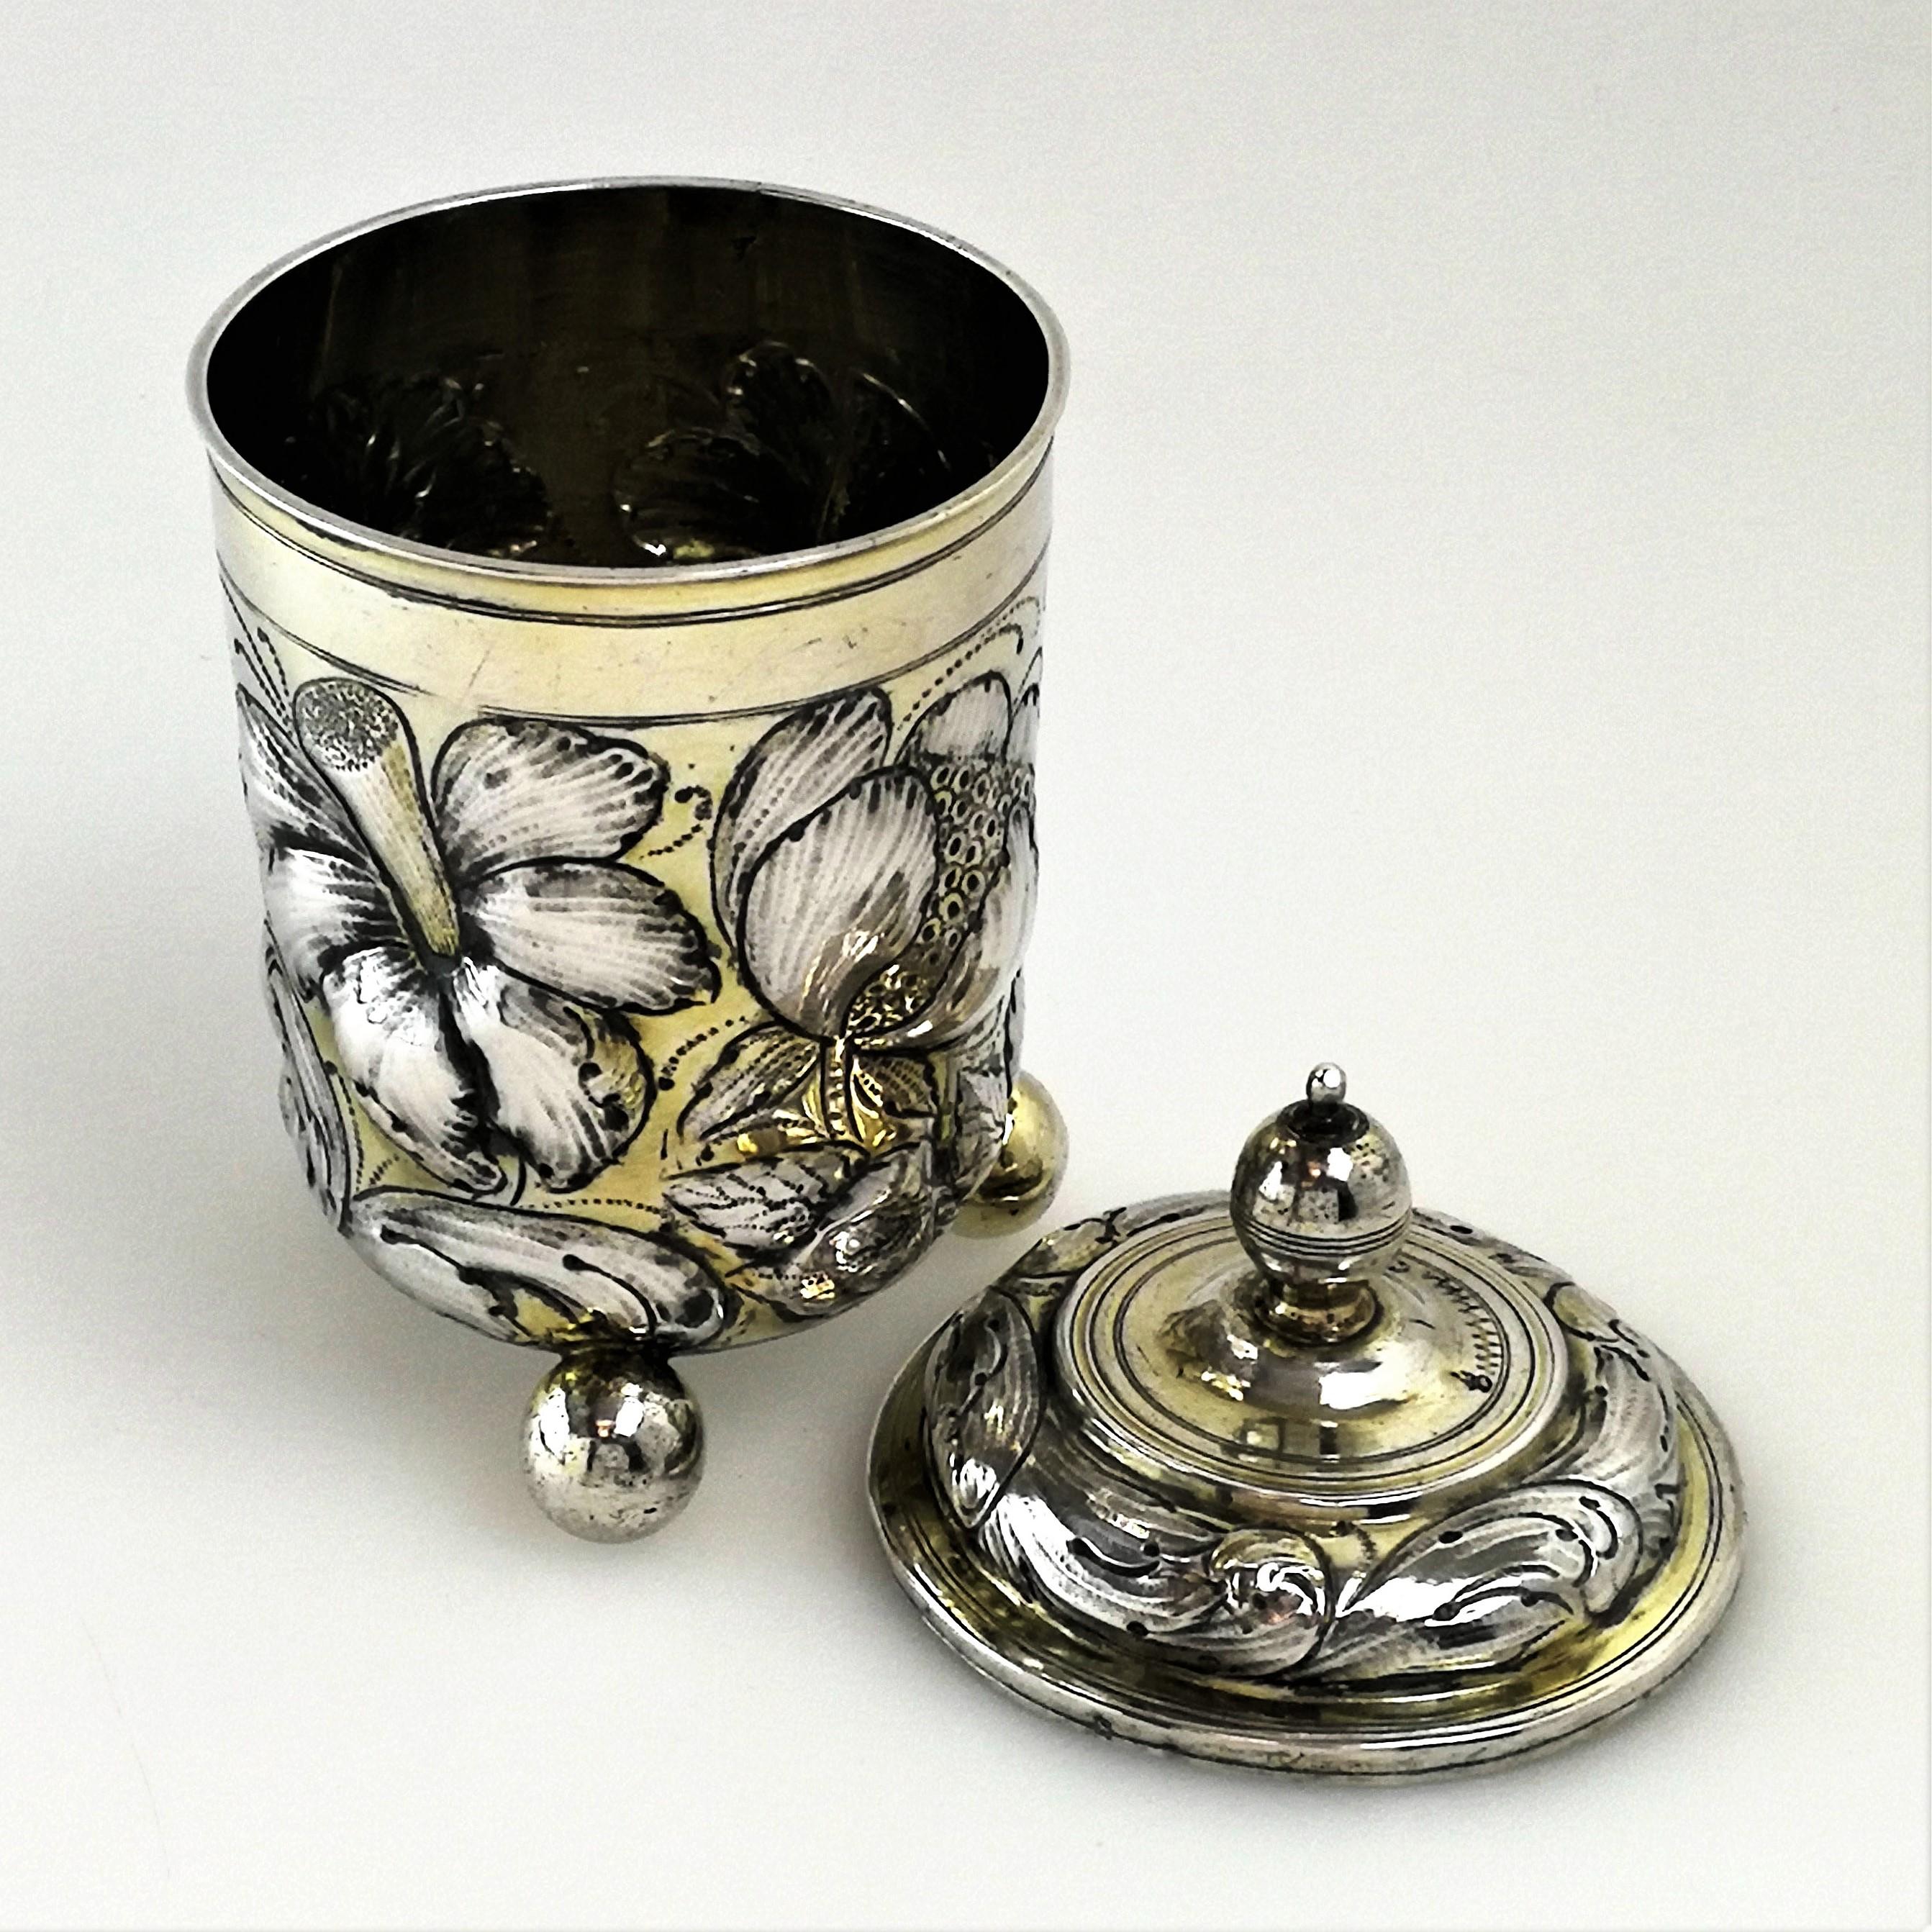 Antique Early German Silver Cup and Cover / Lidded Beaker circa 1680 Augsburg 1